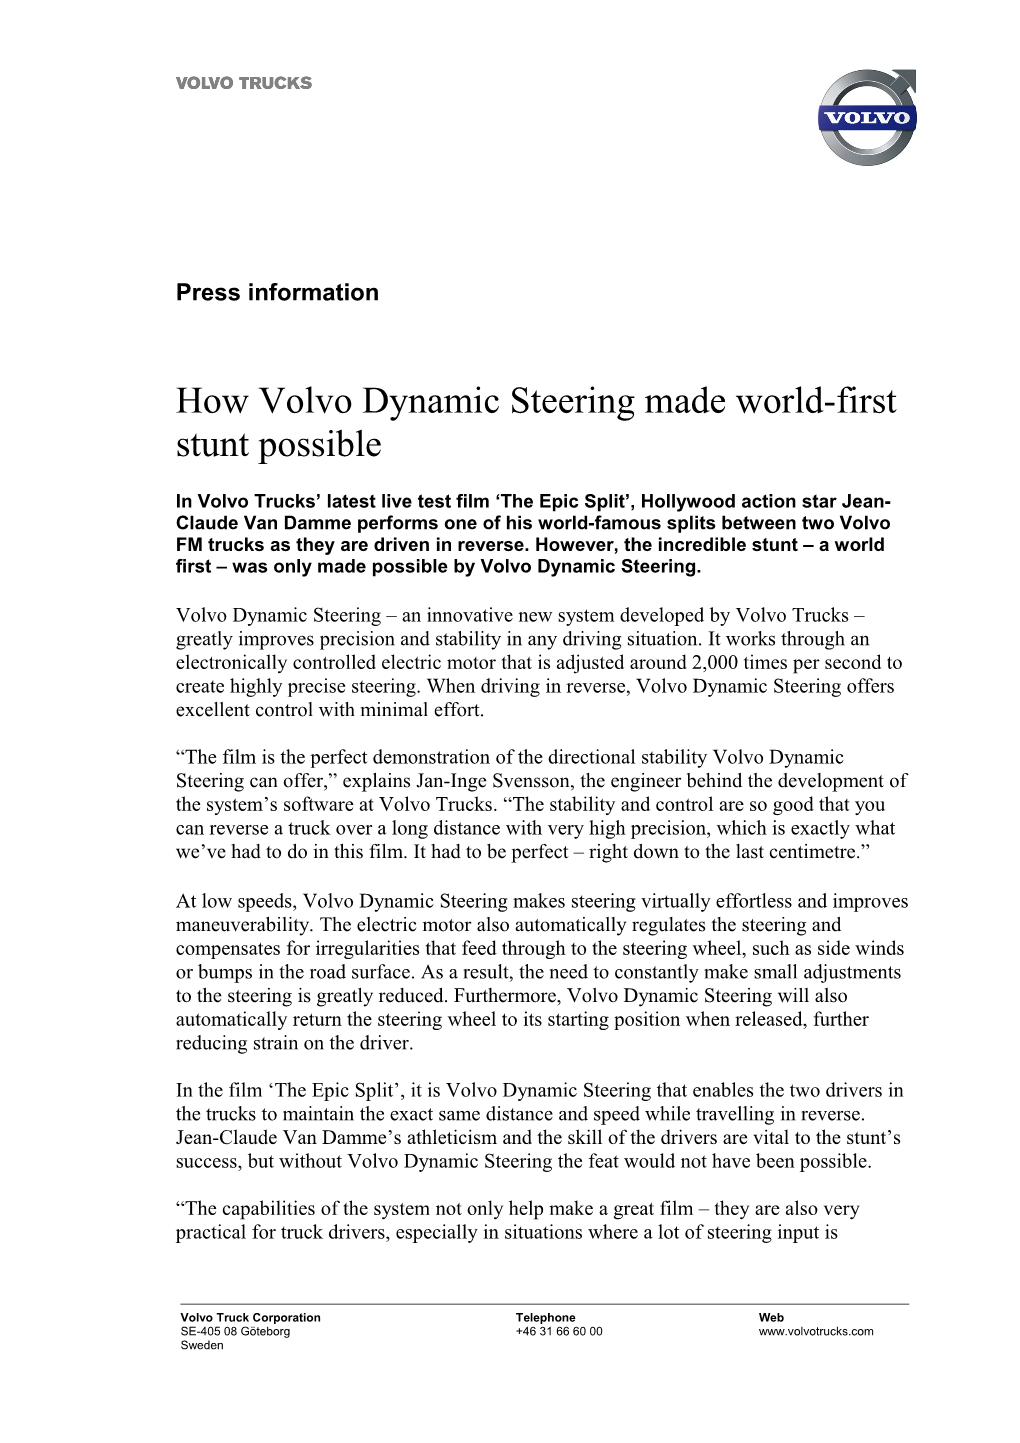 How Volvo Dynamic Steeringmade World-First Stunt Possible